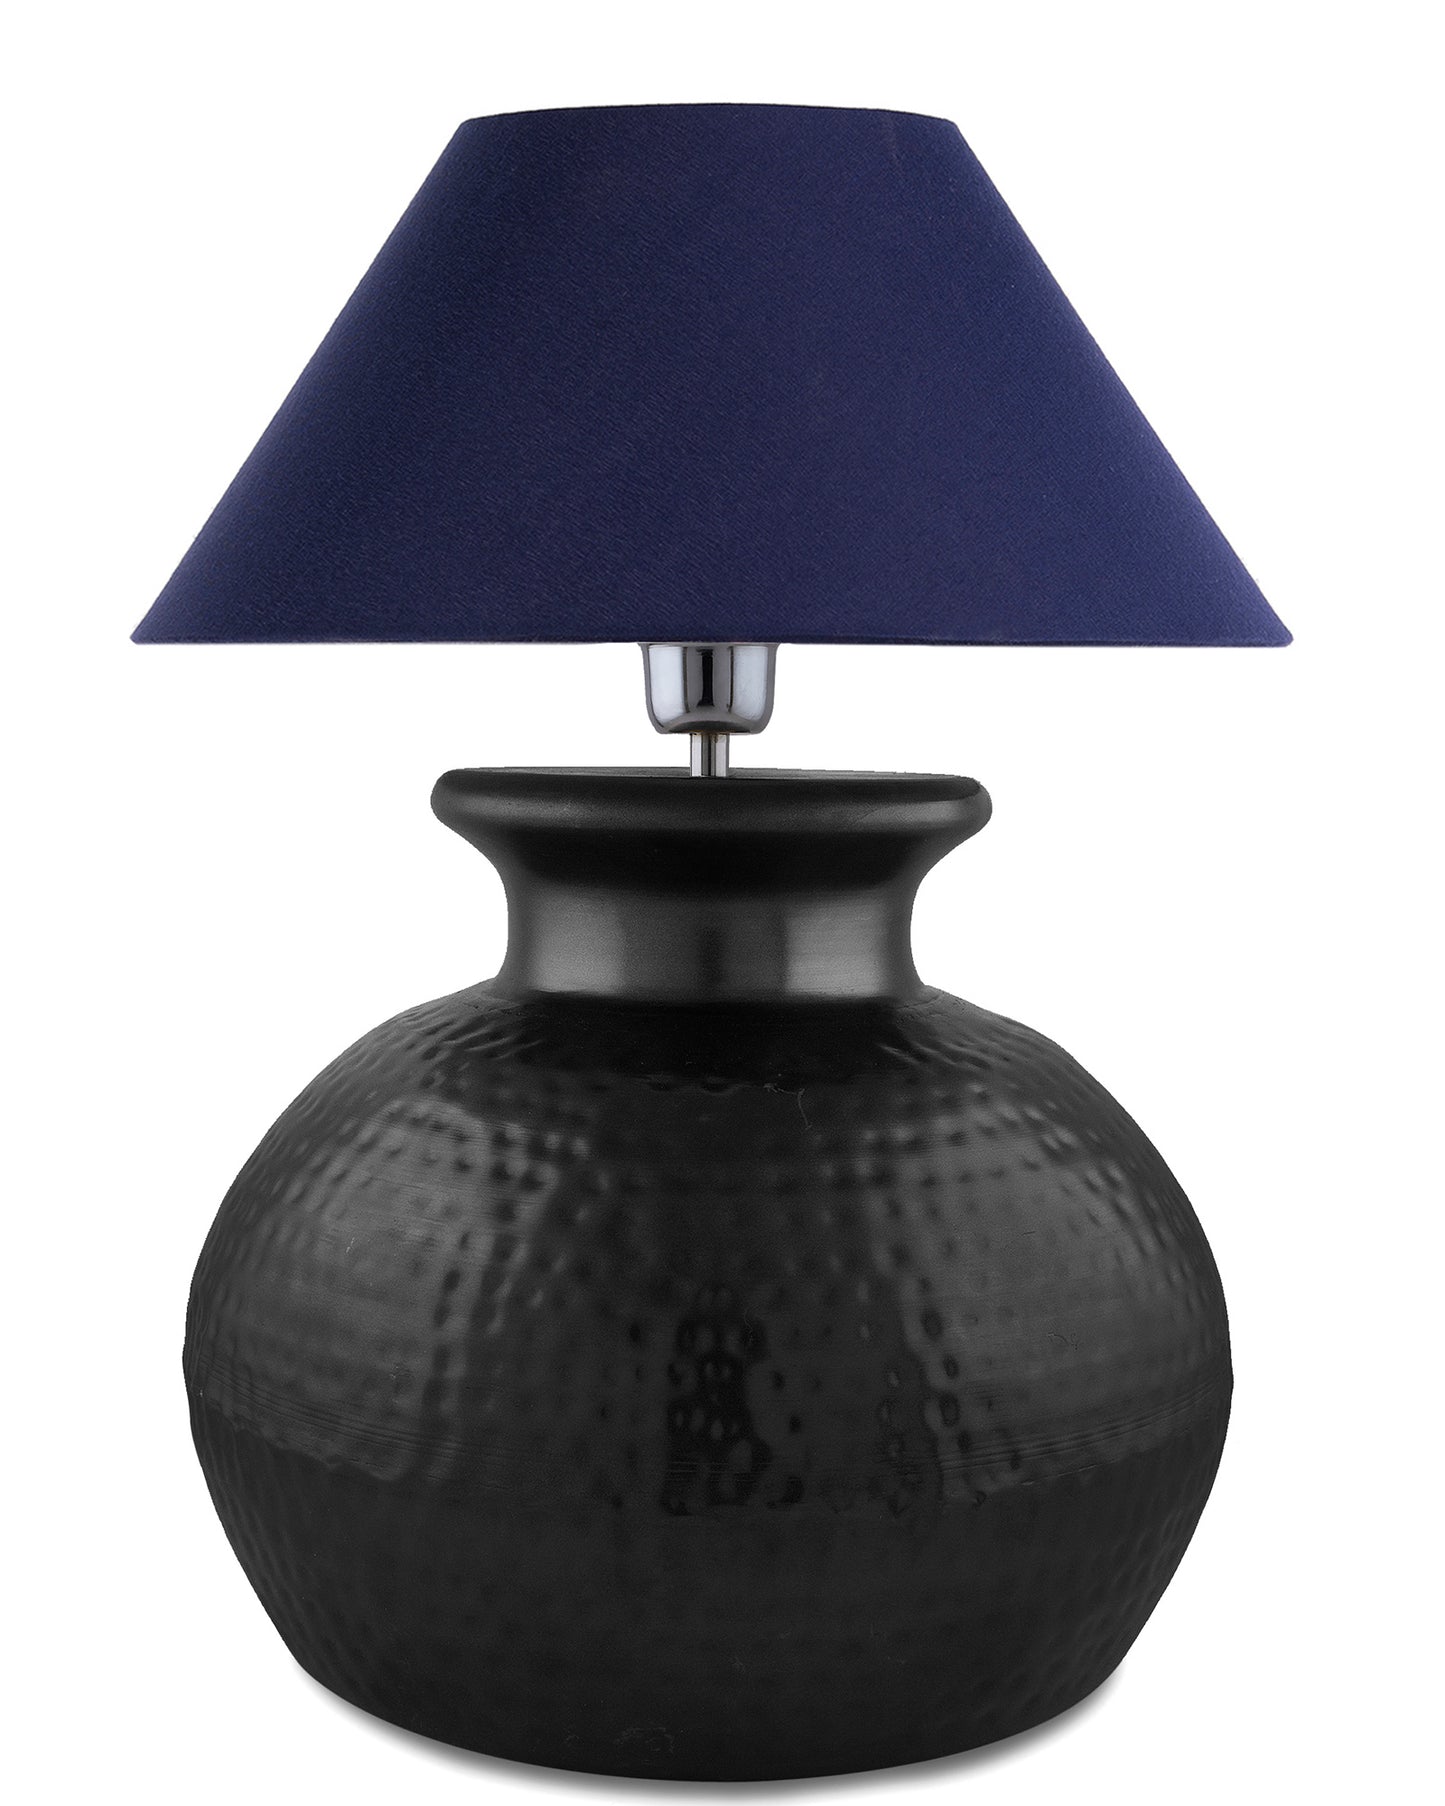 Matt Black Hammered Pitcher Table Lamp with Cone Shade